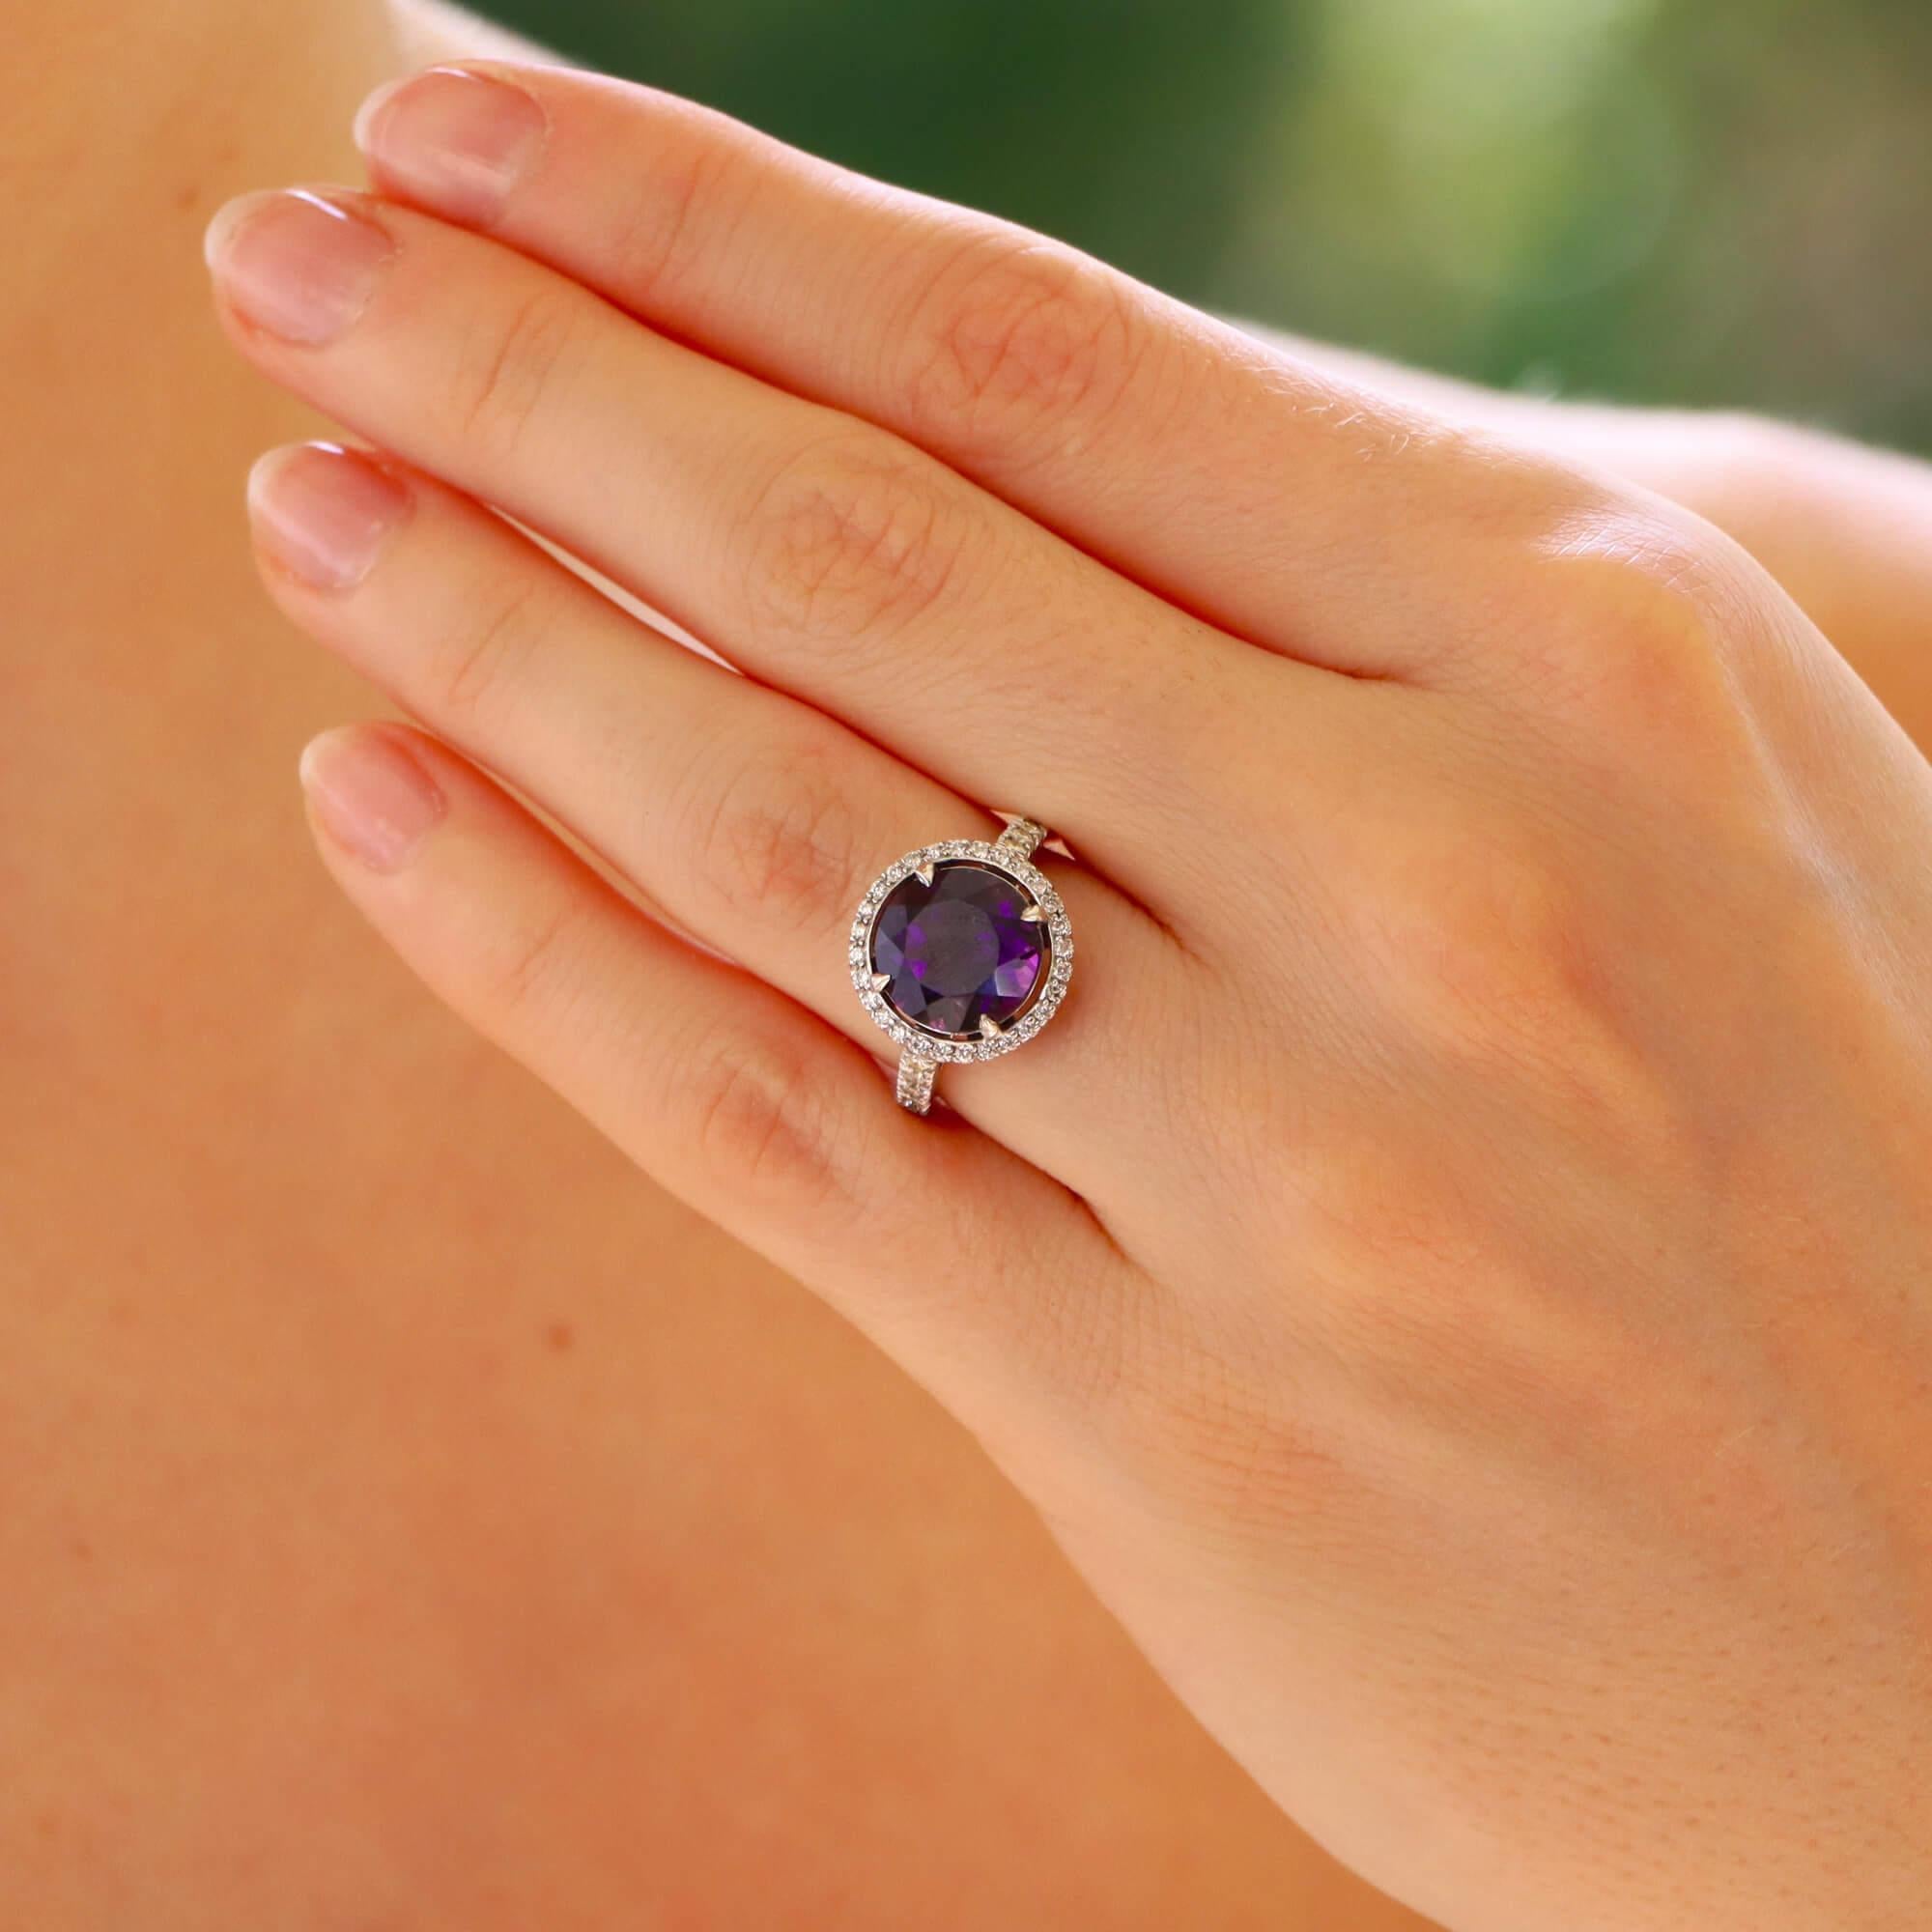 A beautiful amethyst and diamond halo ring set in platinum.

The ring centrally features a beautiful purple round cut amethyst surrounded by a halo of 28 round brilliant-cut diamonds. Each shoulder is further accented with 5 round brilliant cut